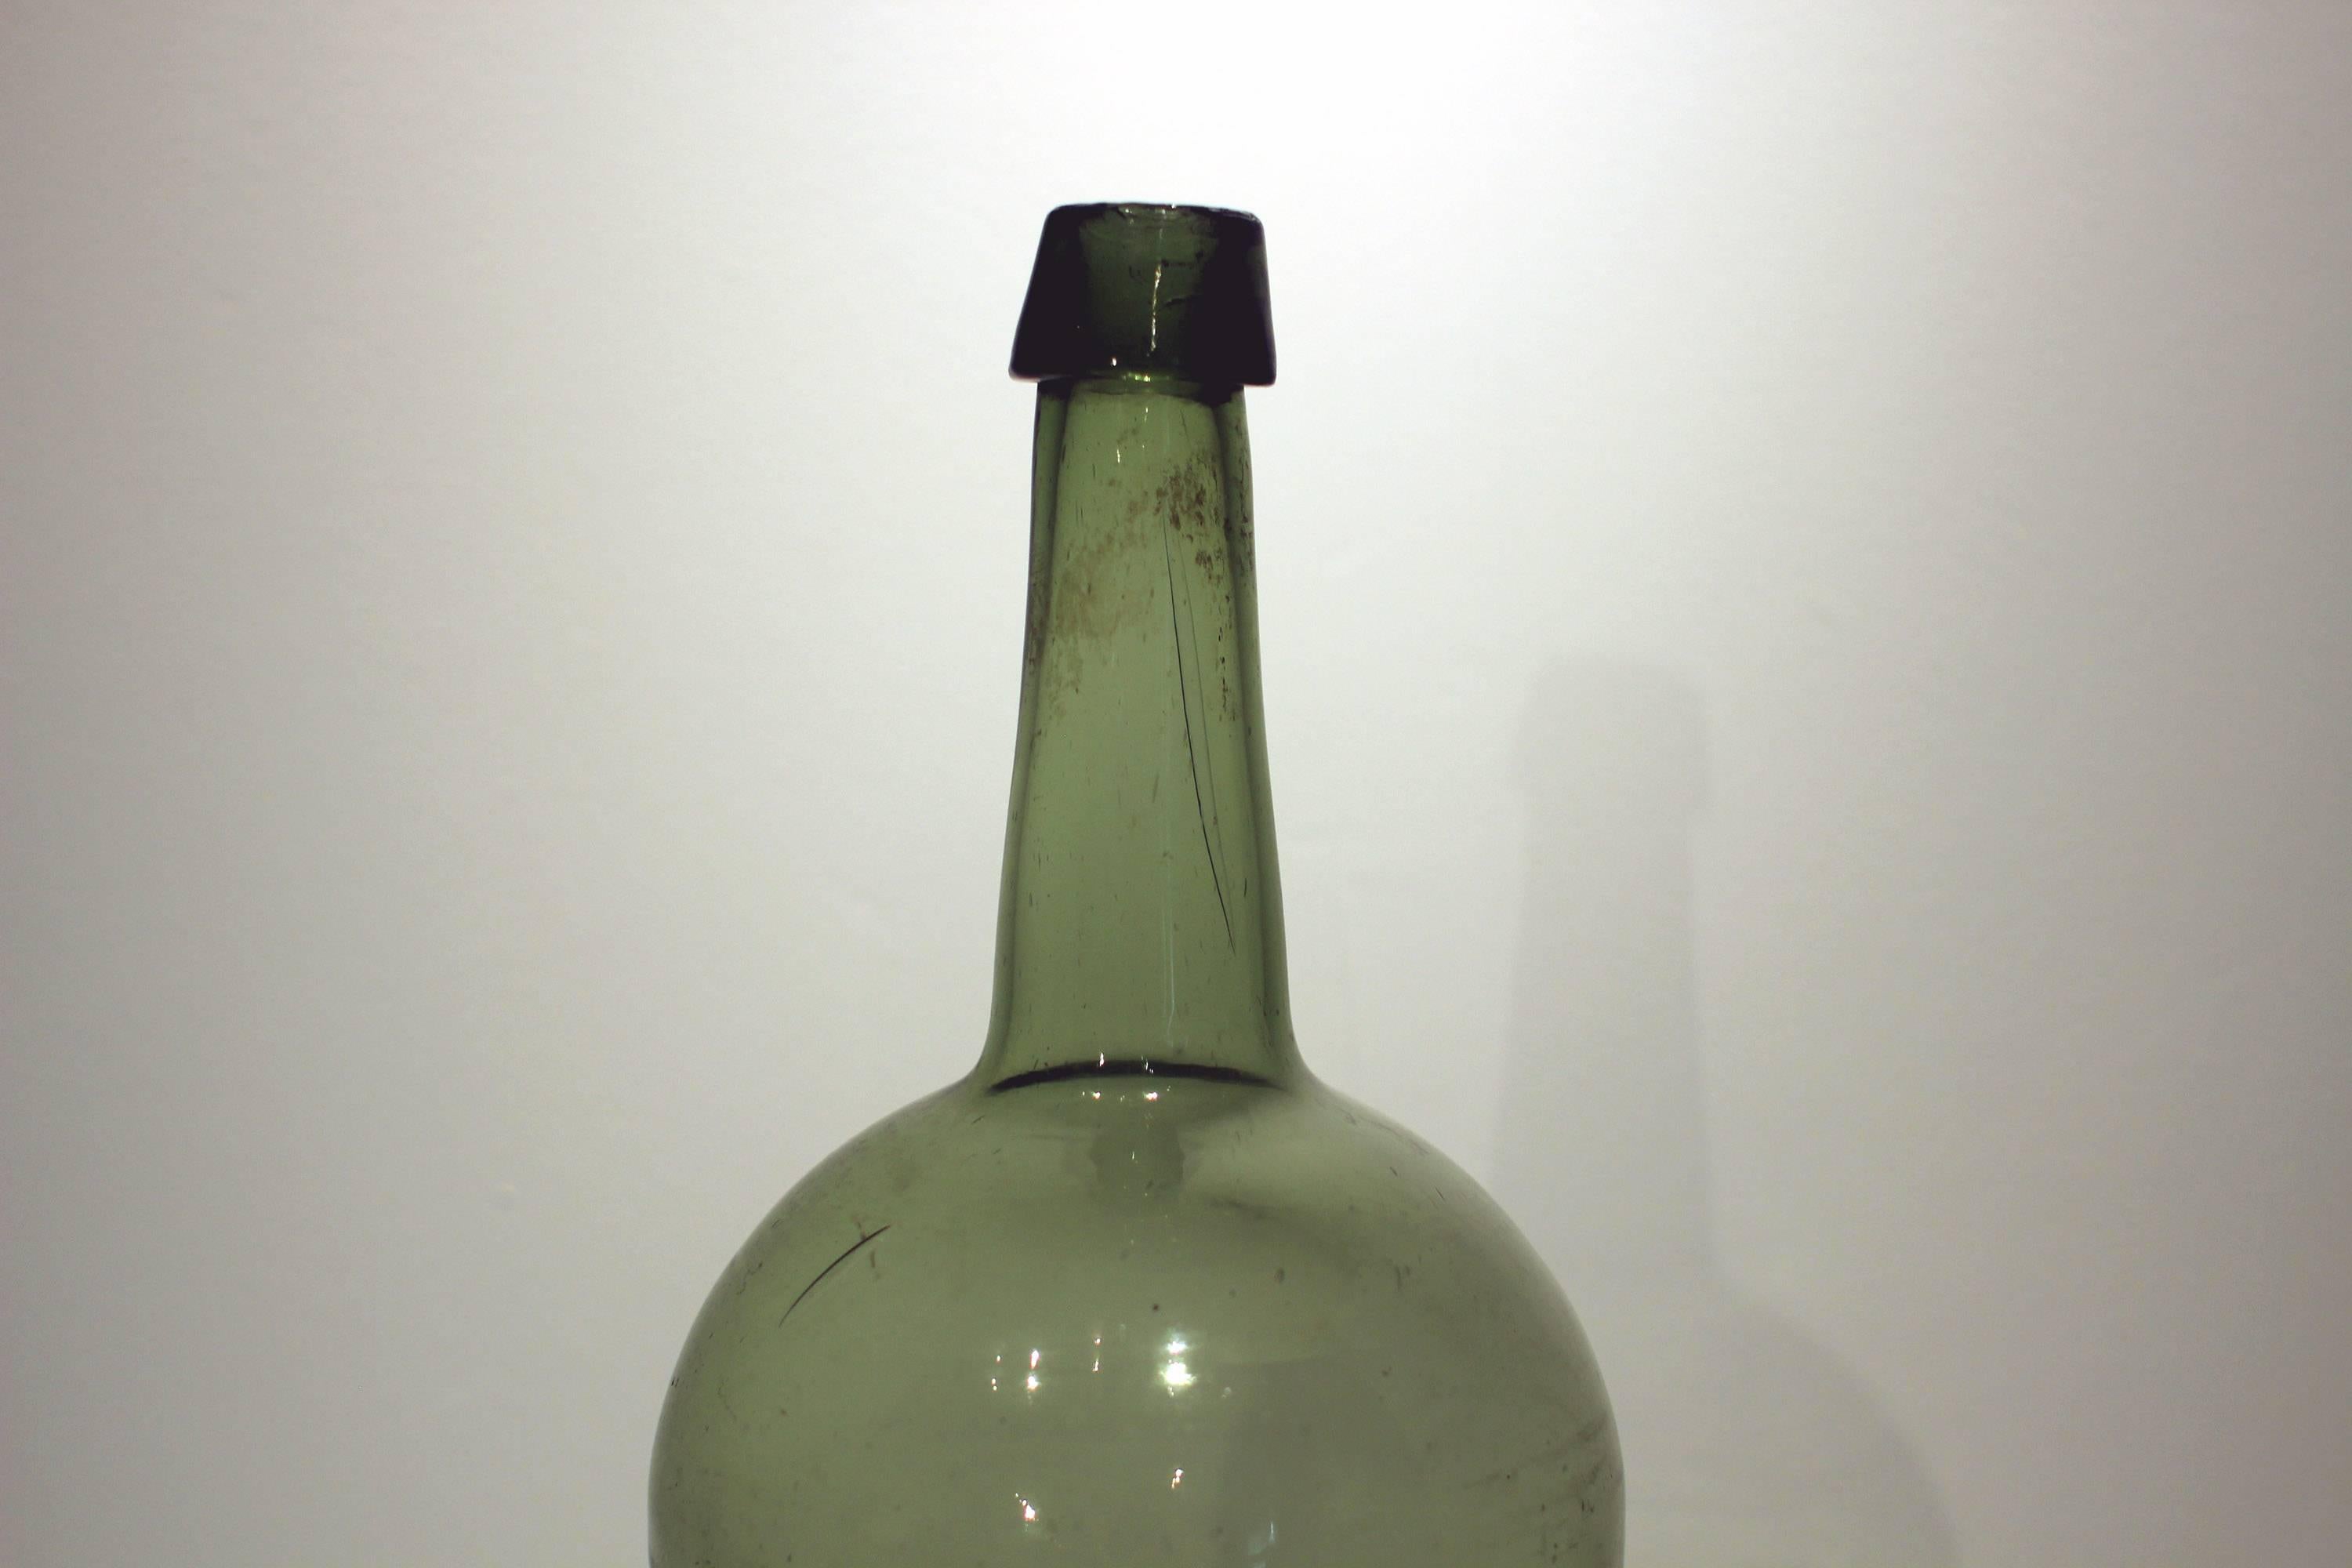 Olive yellow-green glass bottle, handblown and molded, with a nice long neck; American, third quarter of the 19th century. Very good form, excellent condition.